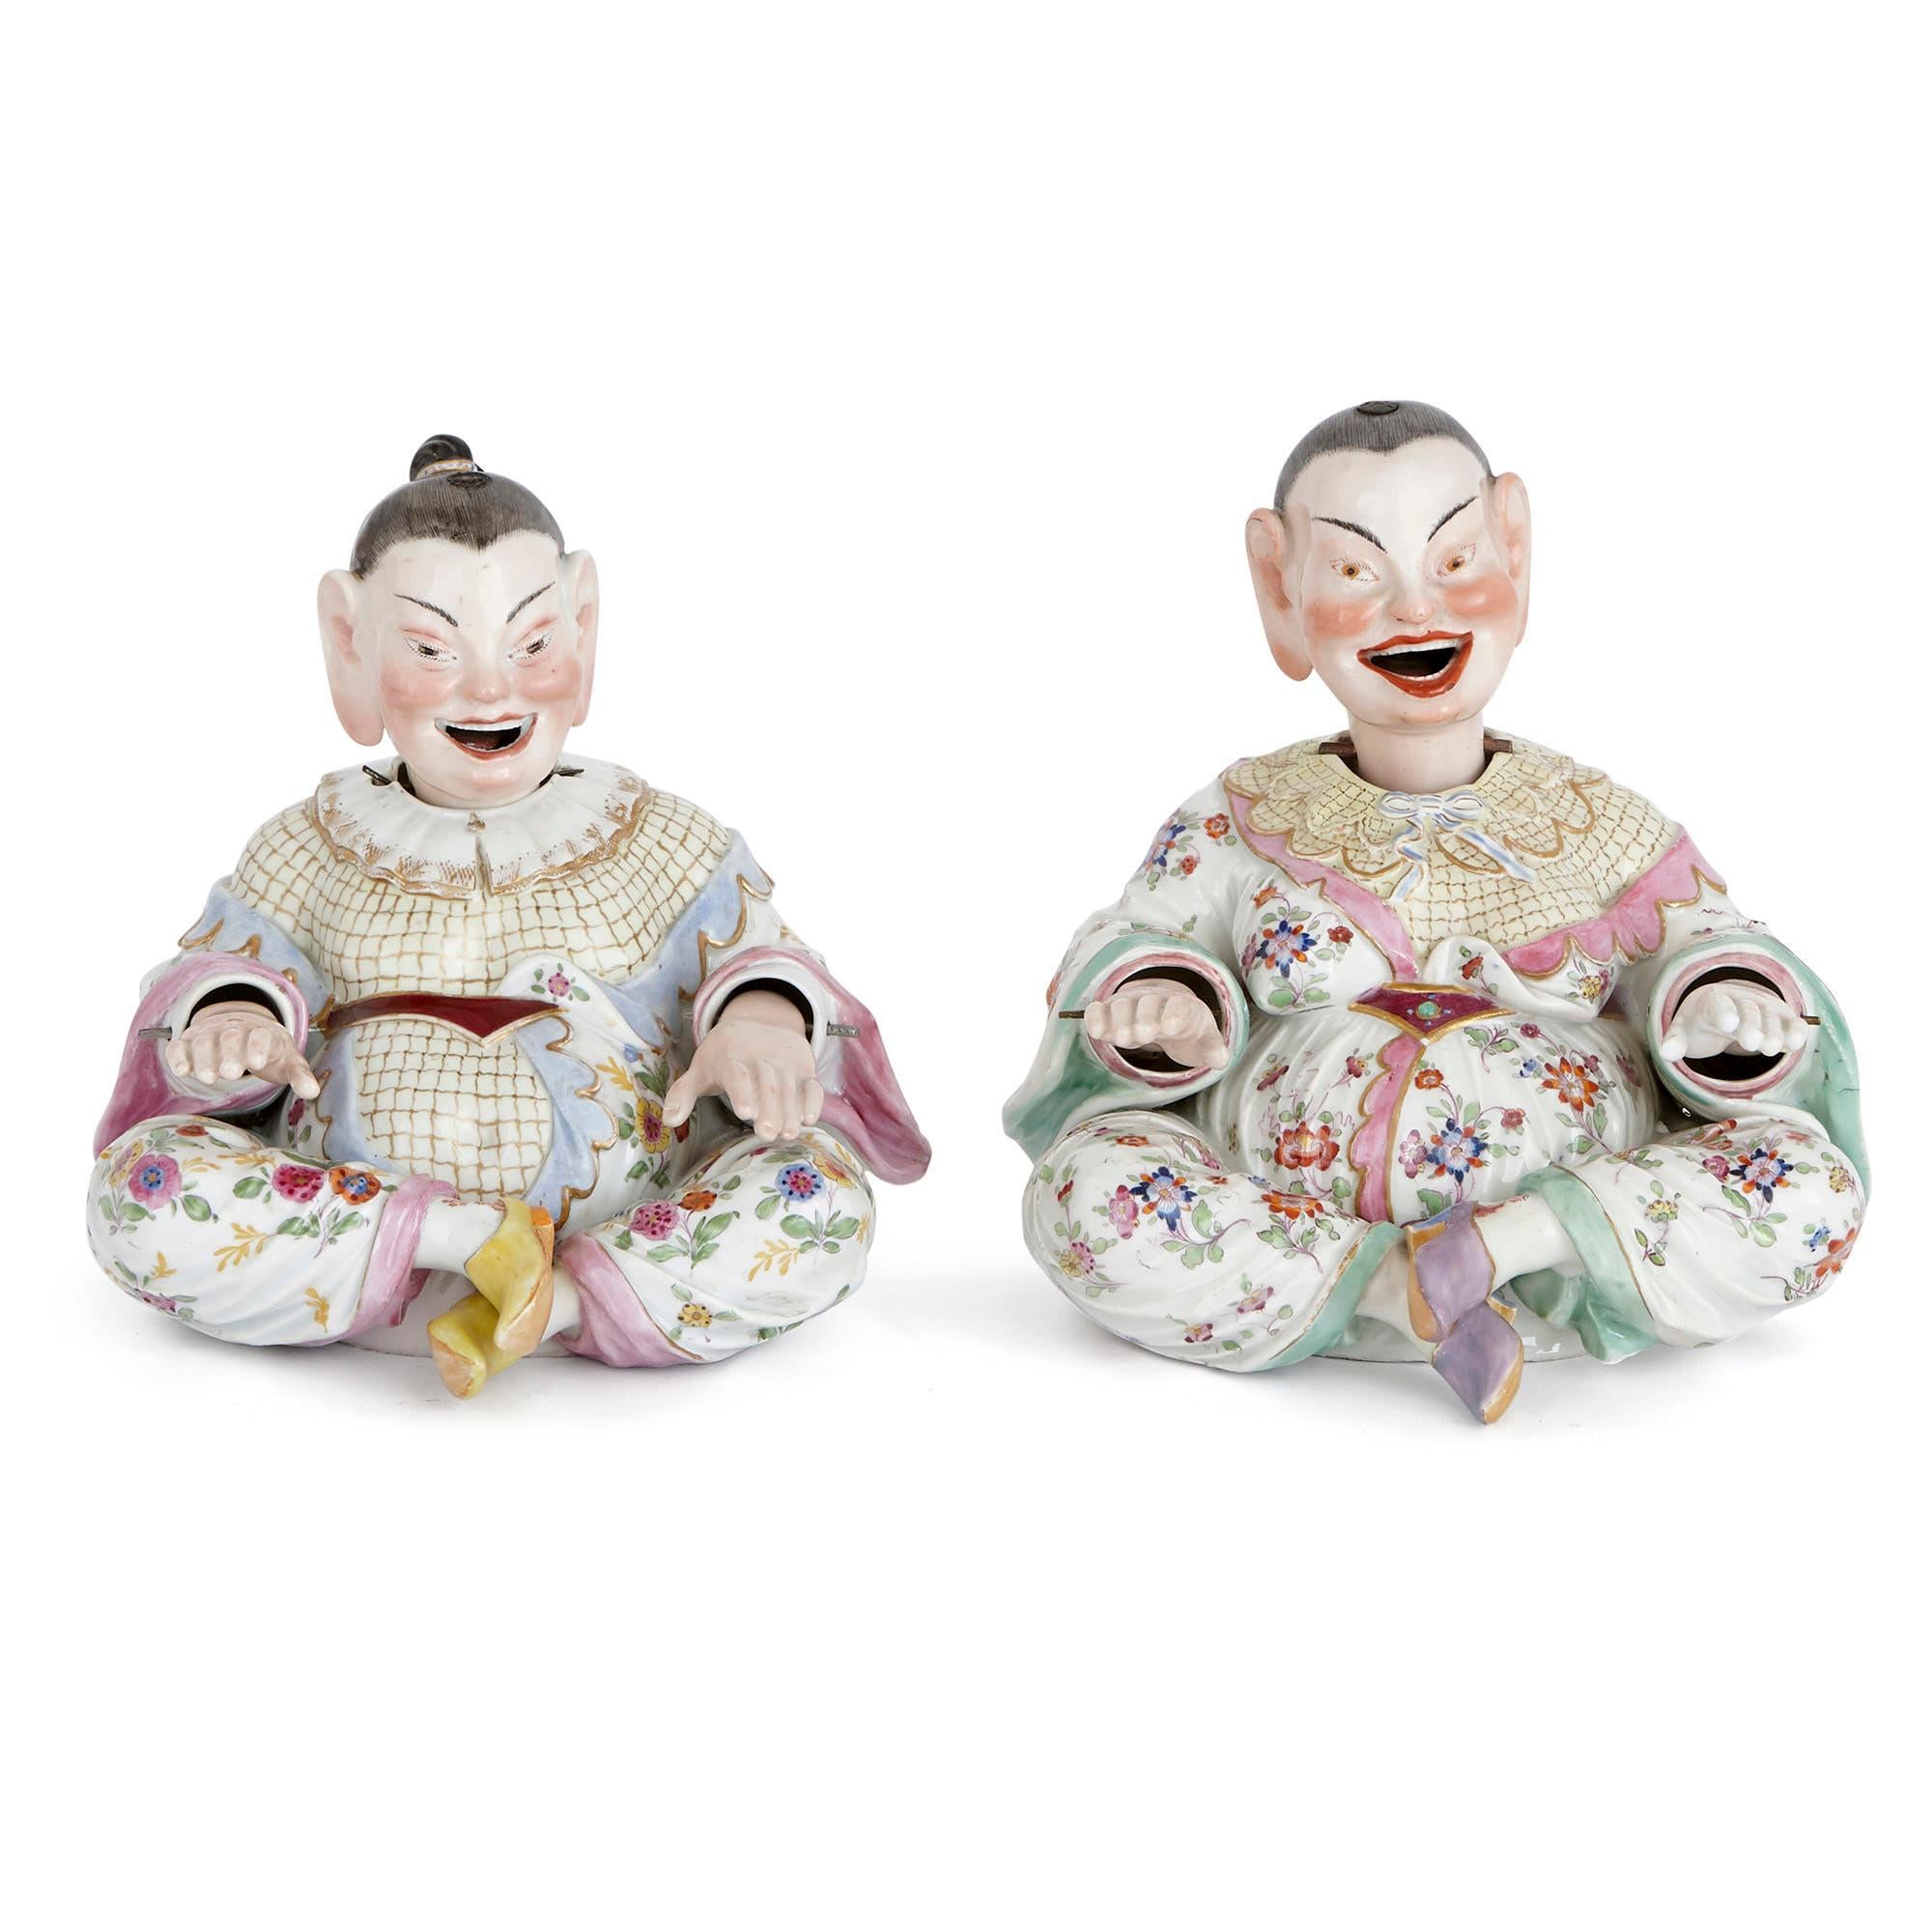 Called ‘pagode’ (or pagoda) figures, these Meissen Porcelain models are based on the sculptures of deities found in pagoda temples in the Far East. Meissen began to produce these kinds of porcelain figures in the early 18th century, prompted by the